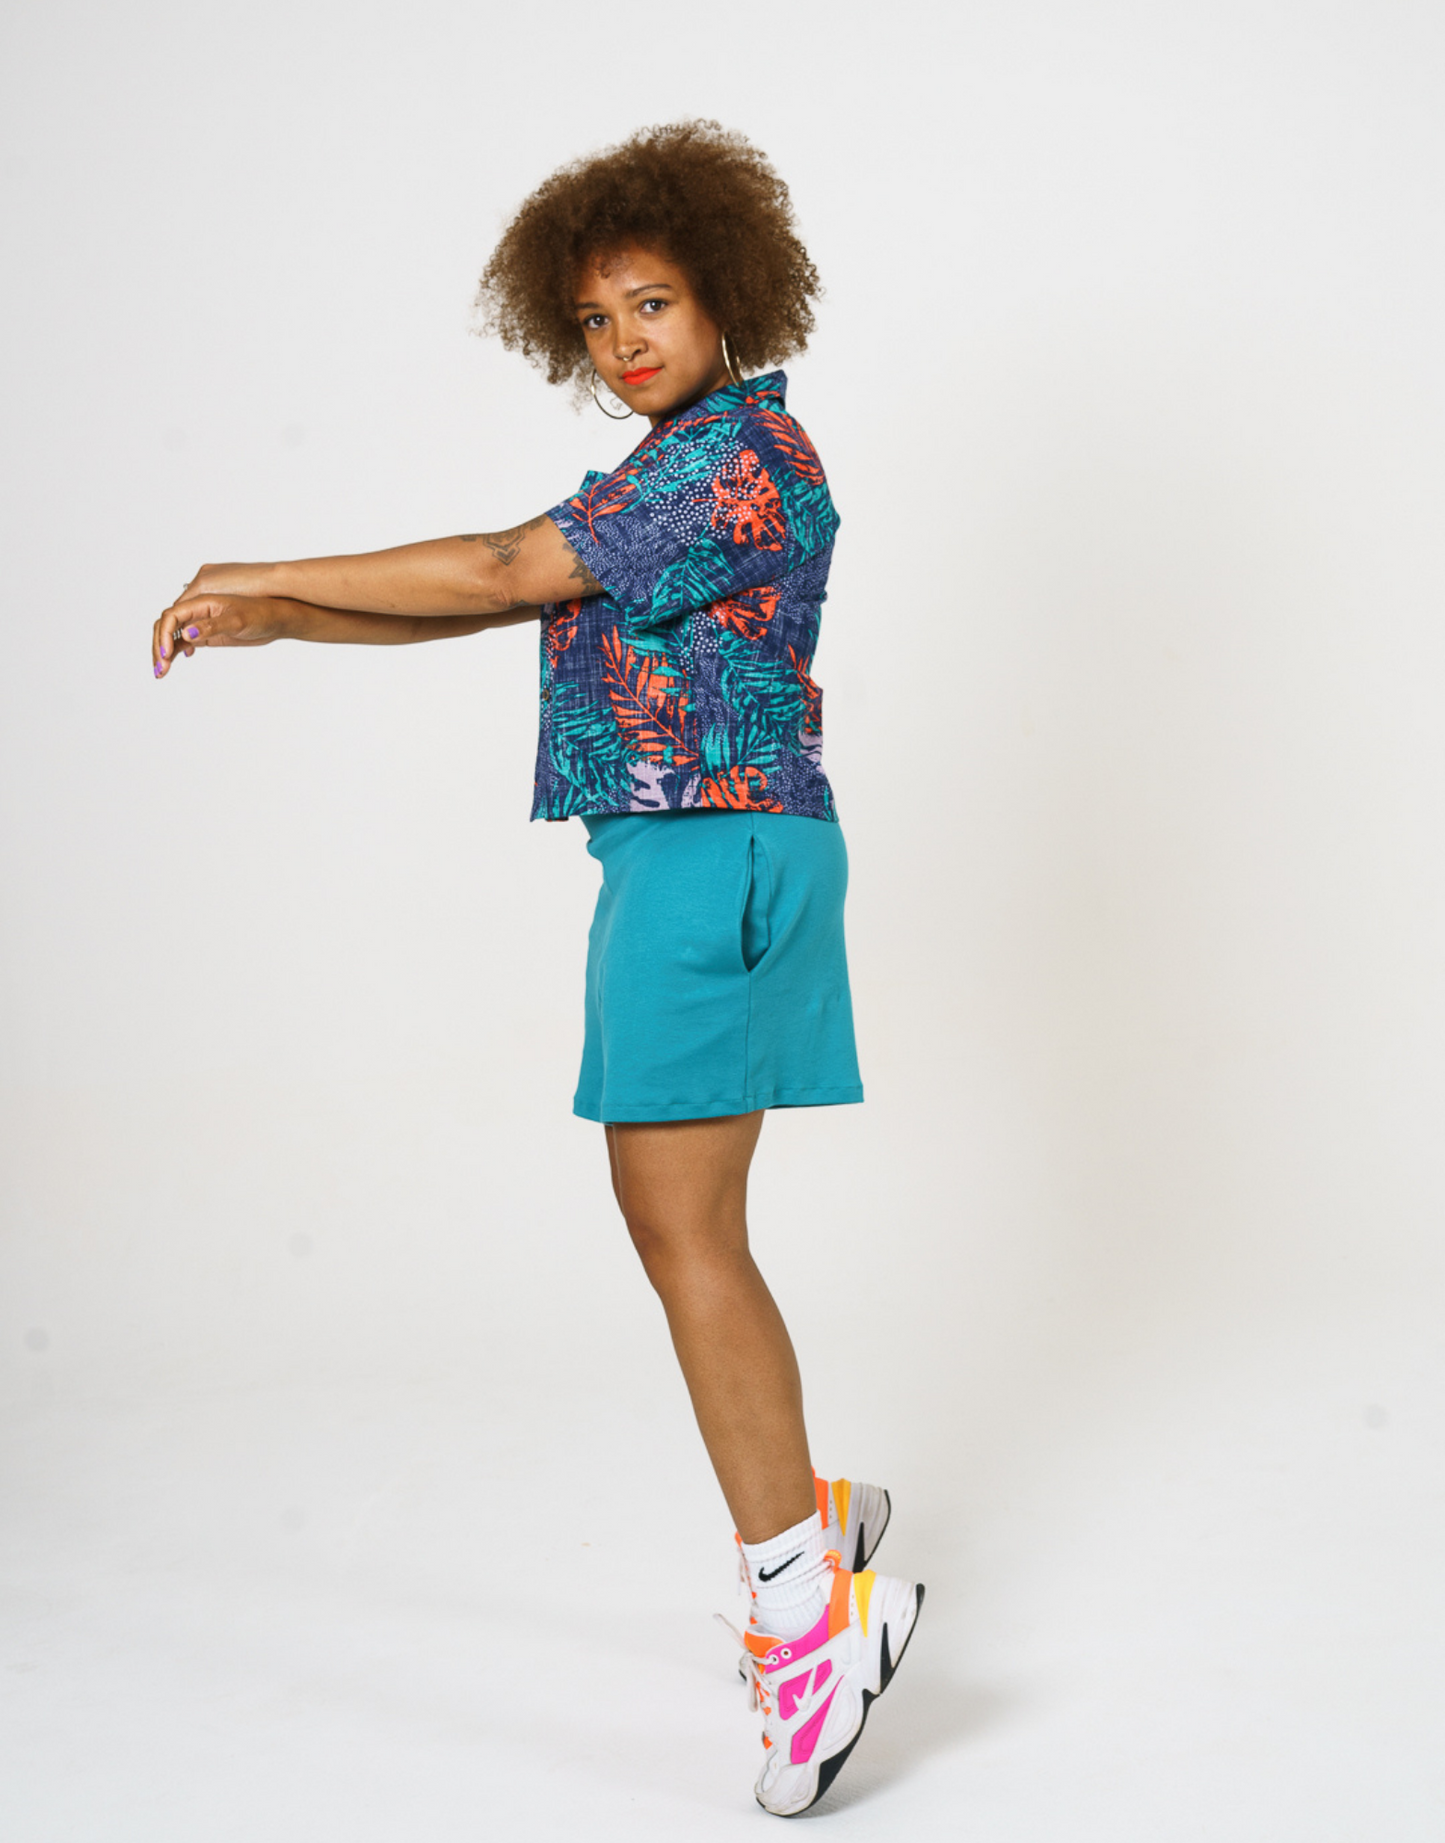 Digital Printed Cotton womens shirt, in bright teal and orange leaf print, paired with our teal Jersey shorts and styles with Bright trainers and socks. 